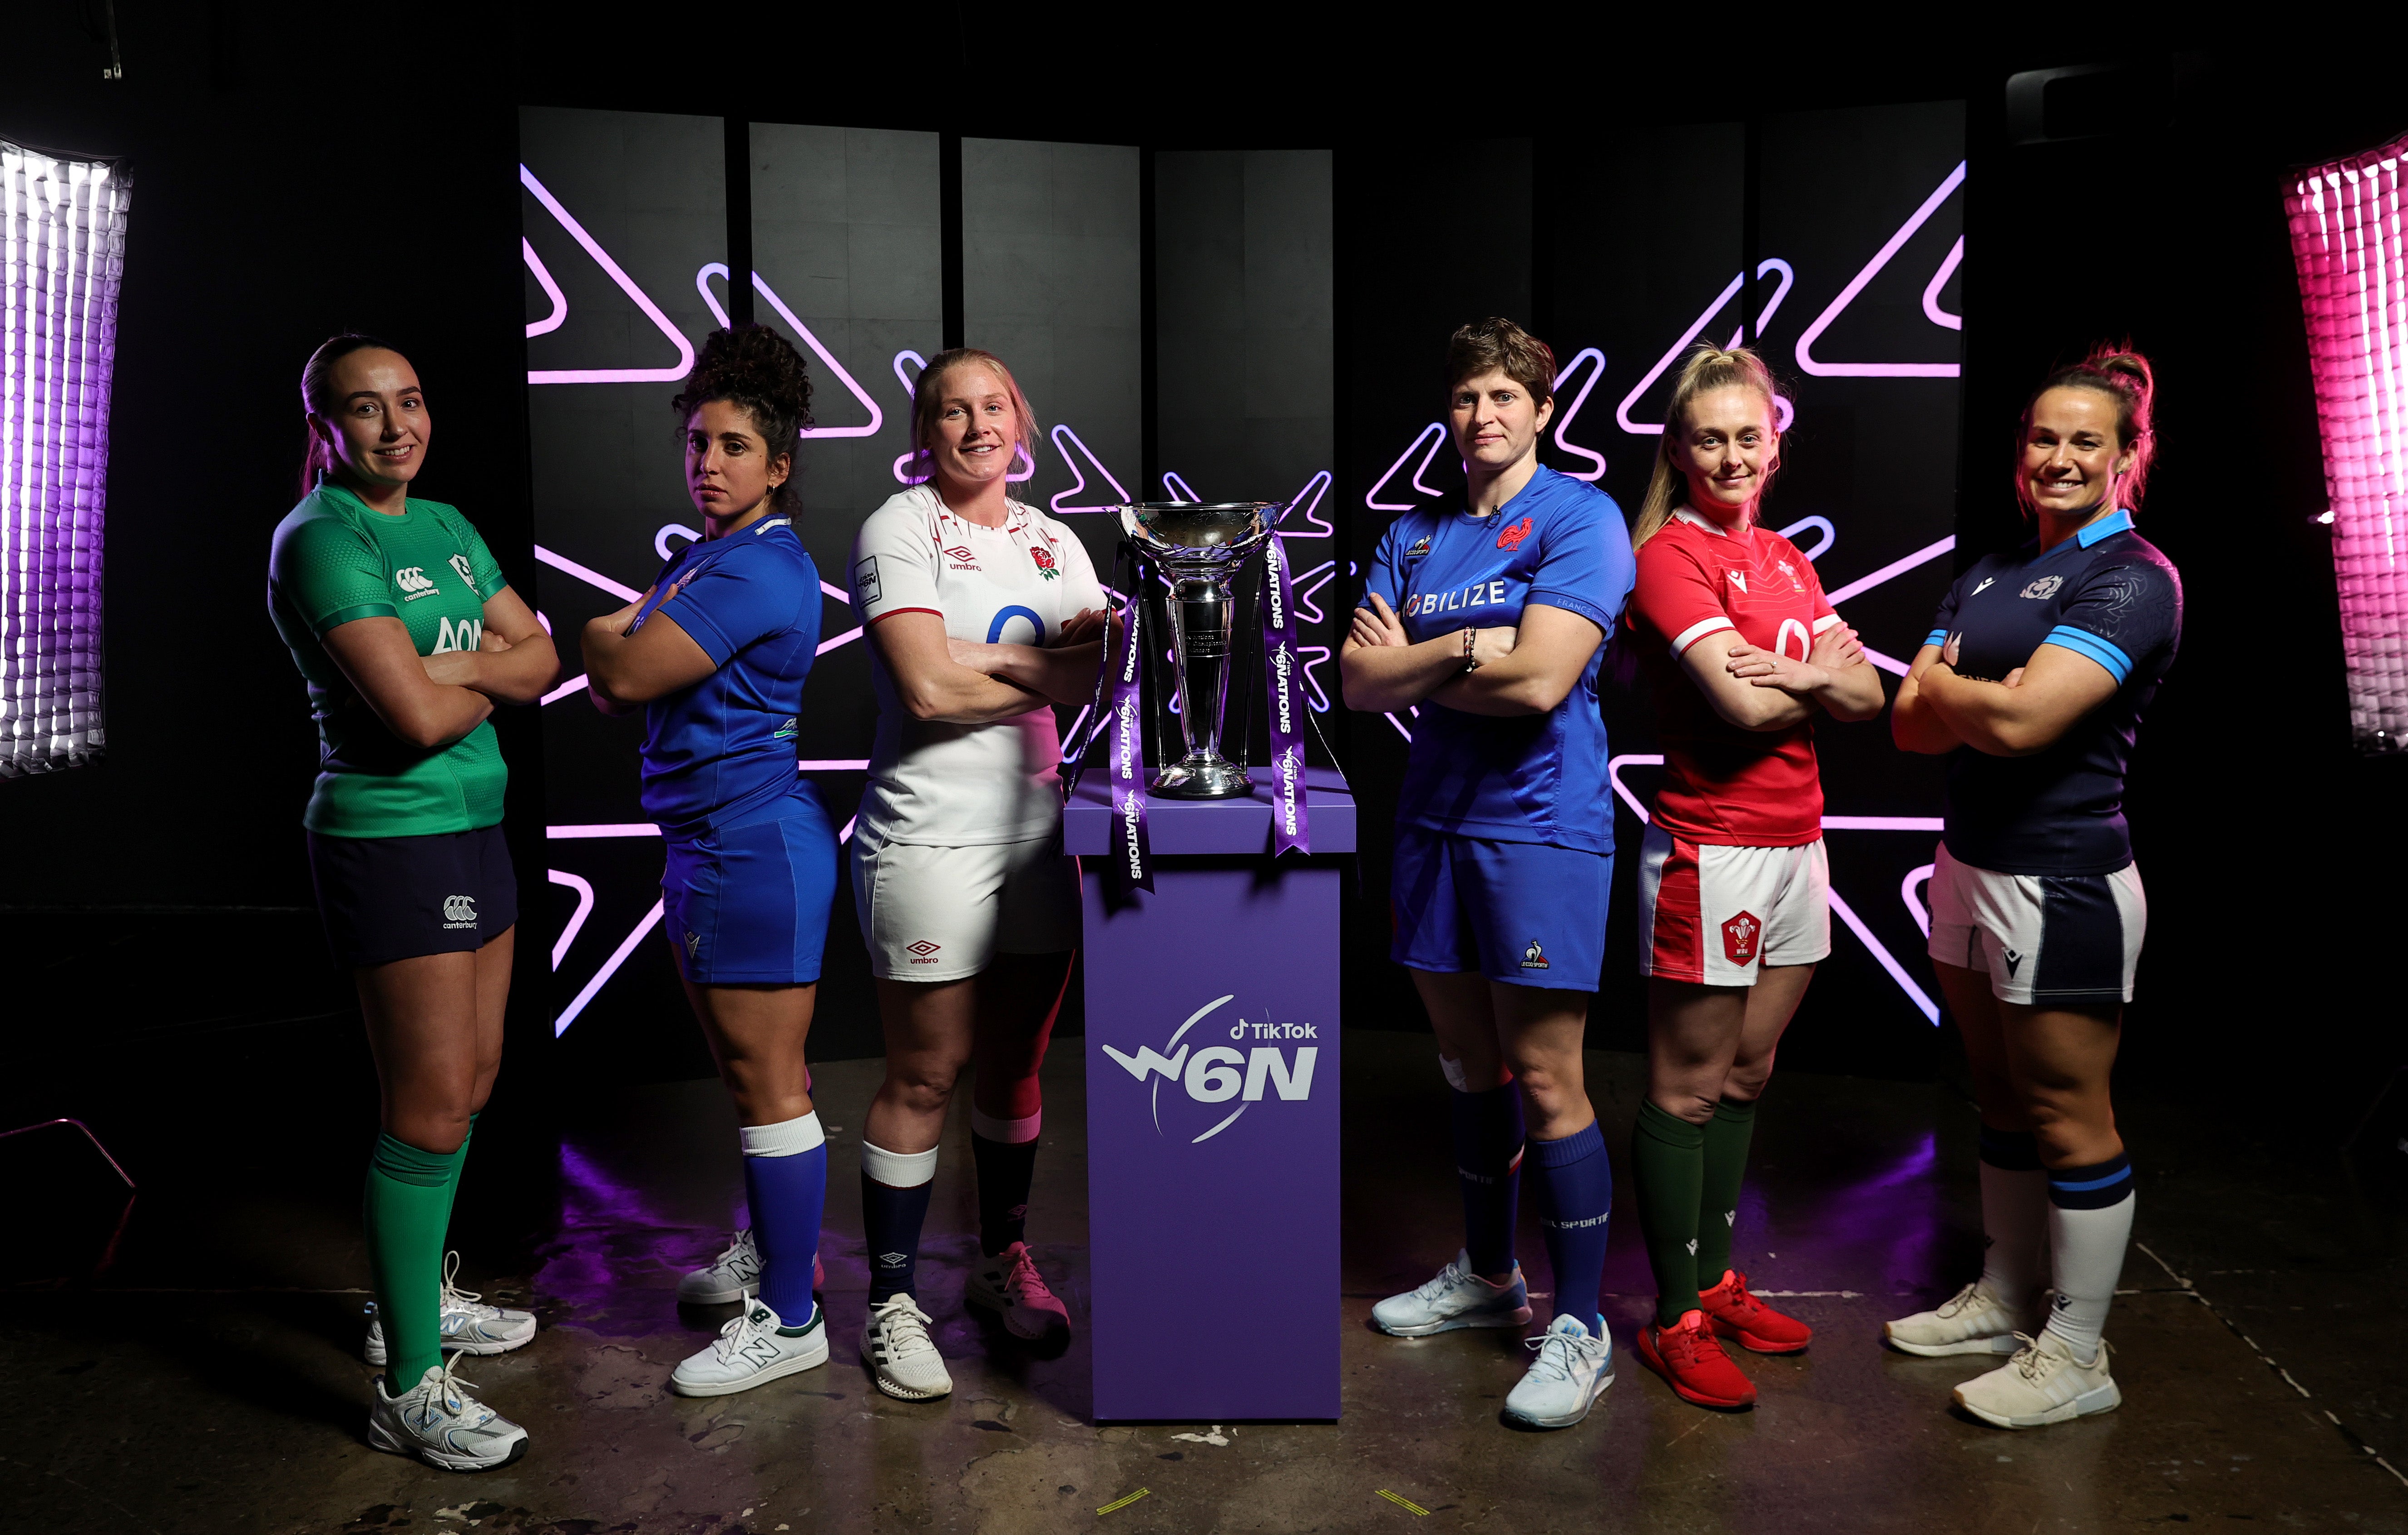 Representatives from each team gathered for the Women’s Six Nations launch